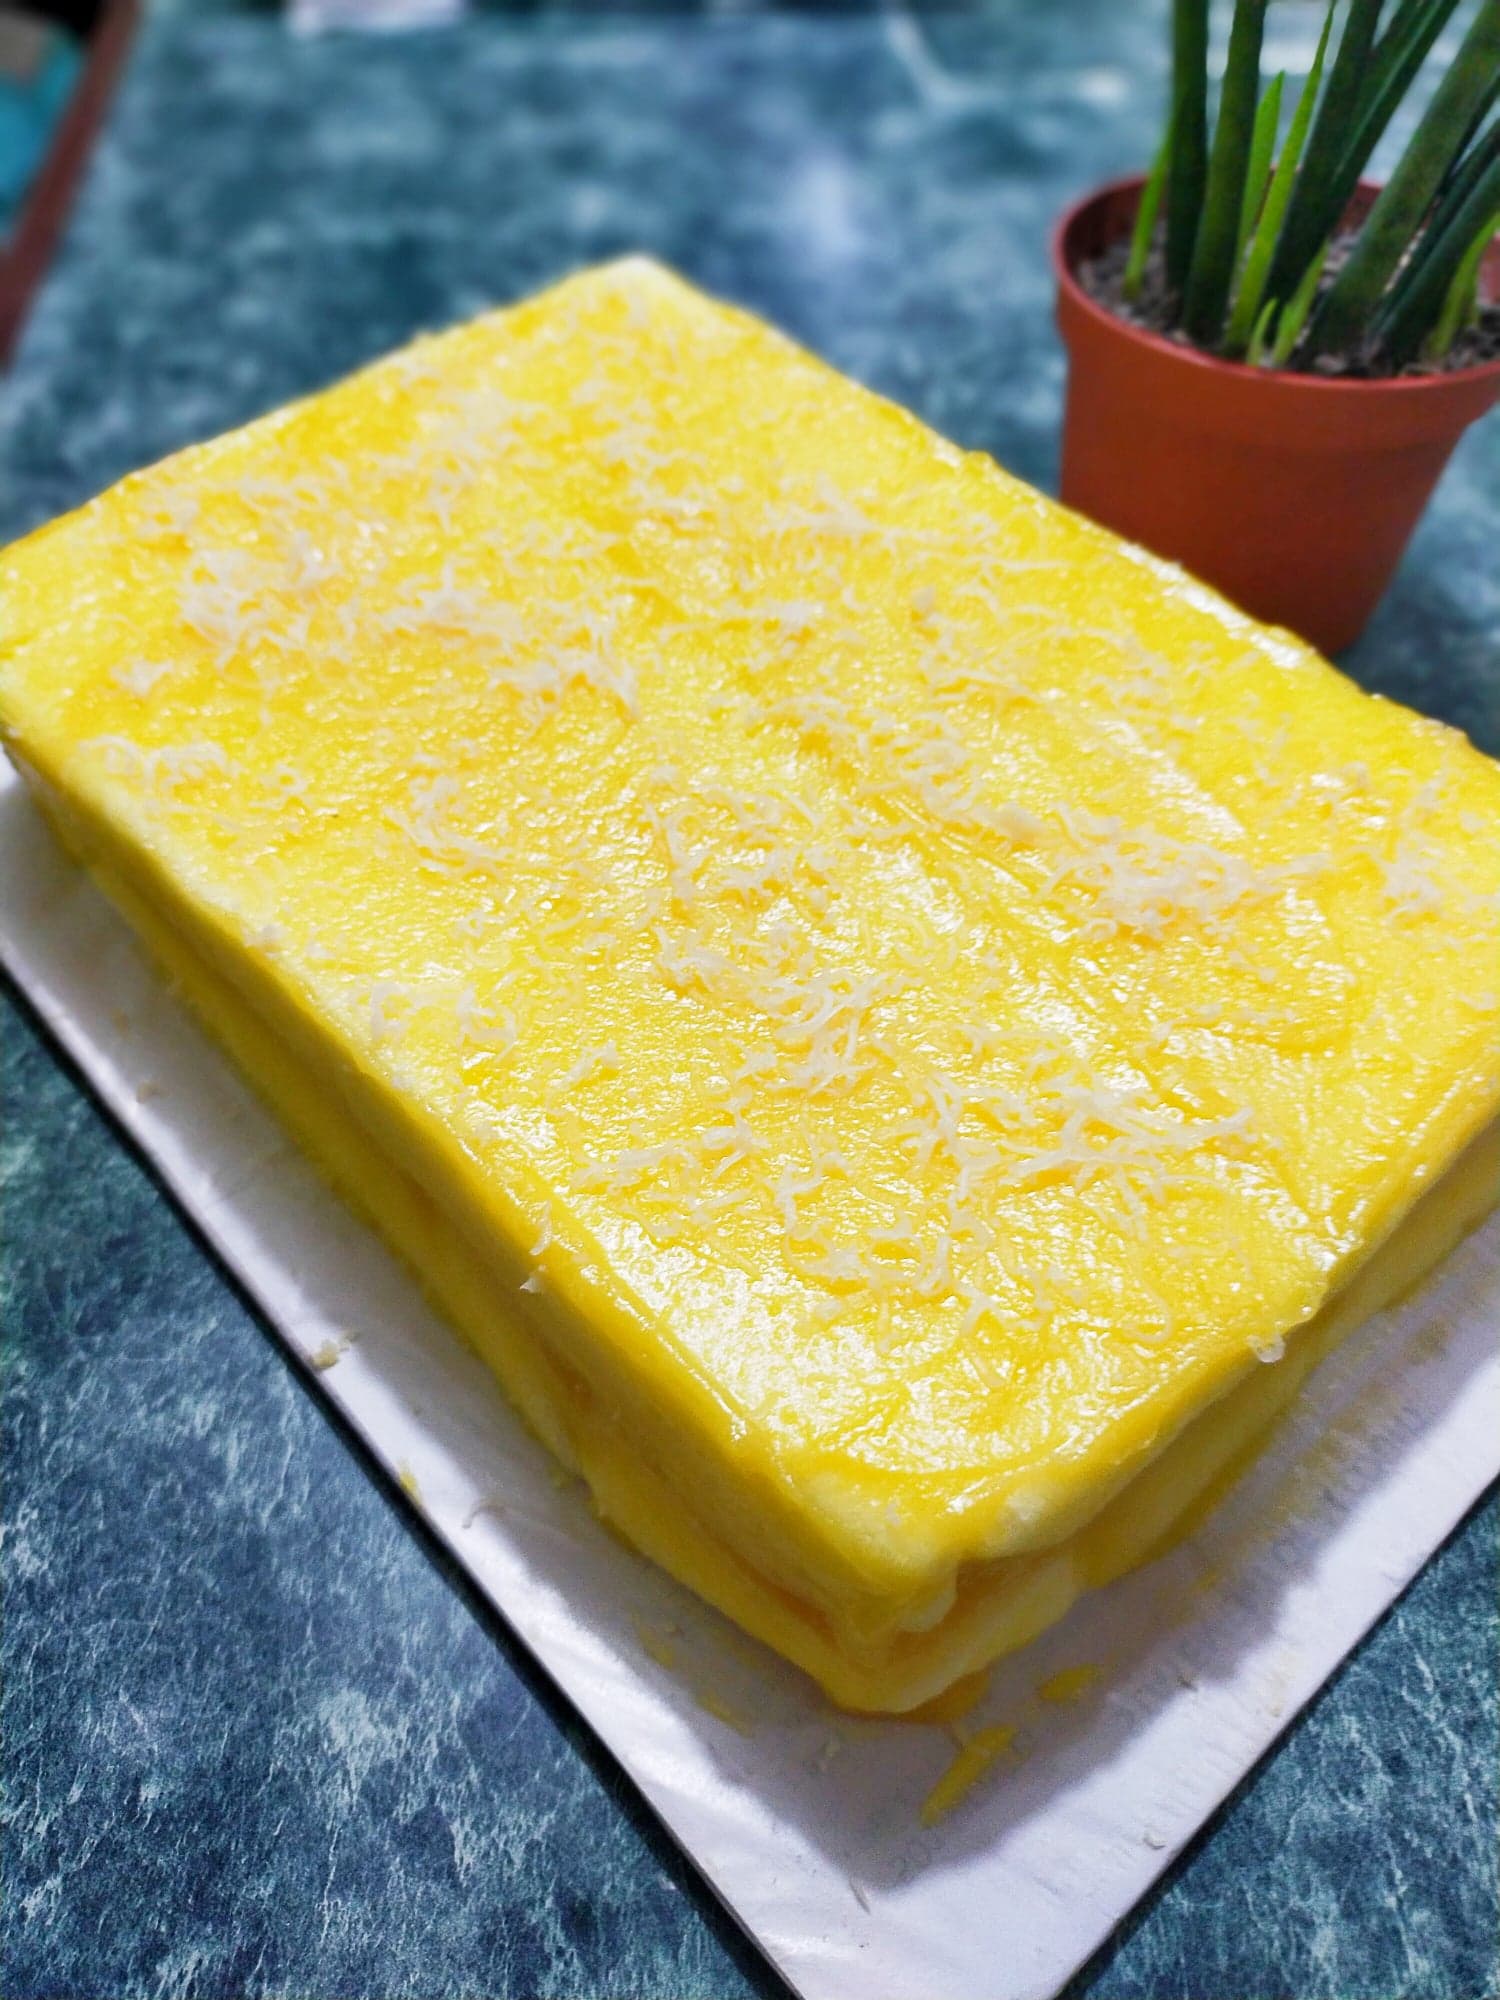 Our Kind of Yema Cake